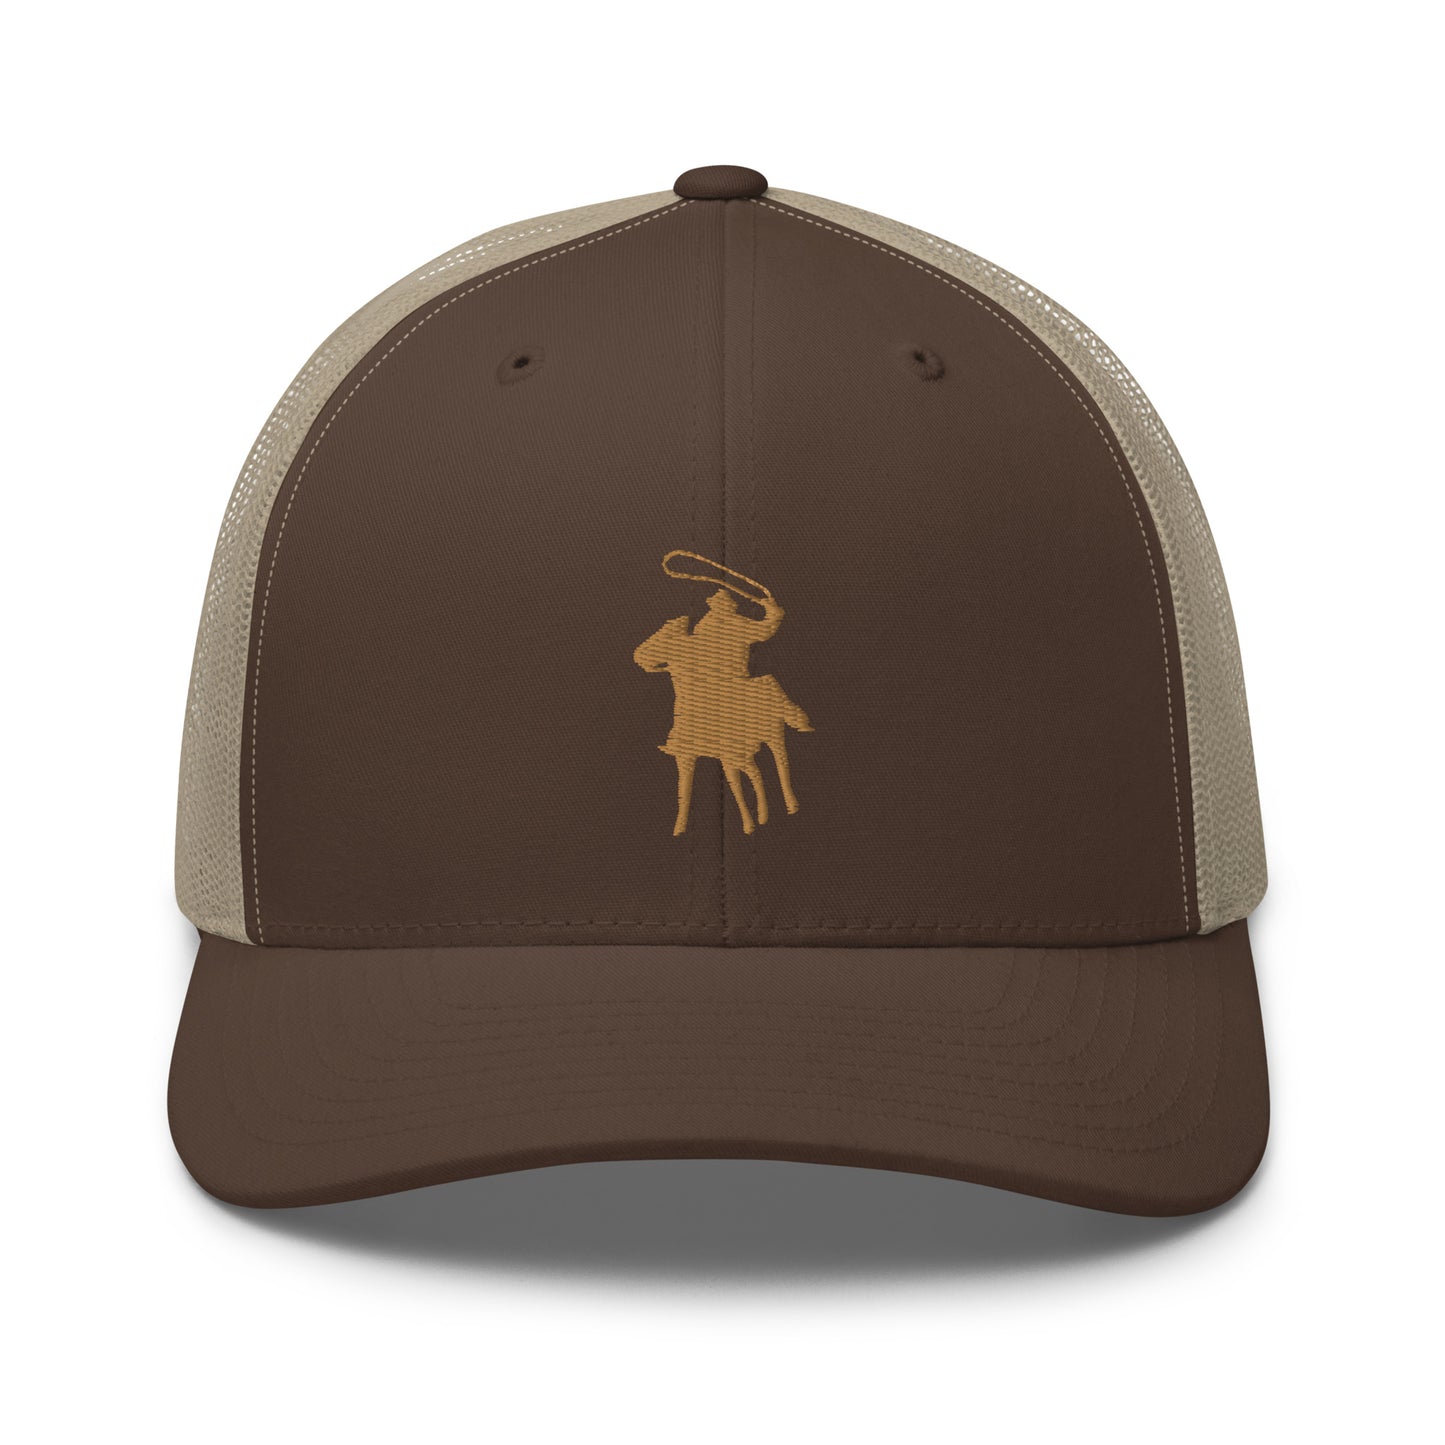 Country Polo Trucker Cap (Light Brown Logo on Brown Hat) 